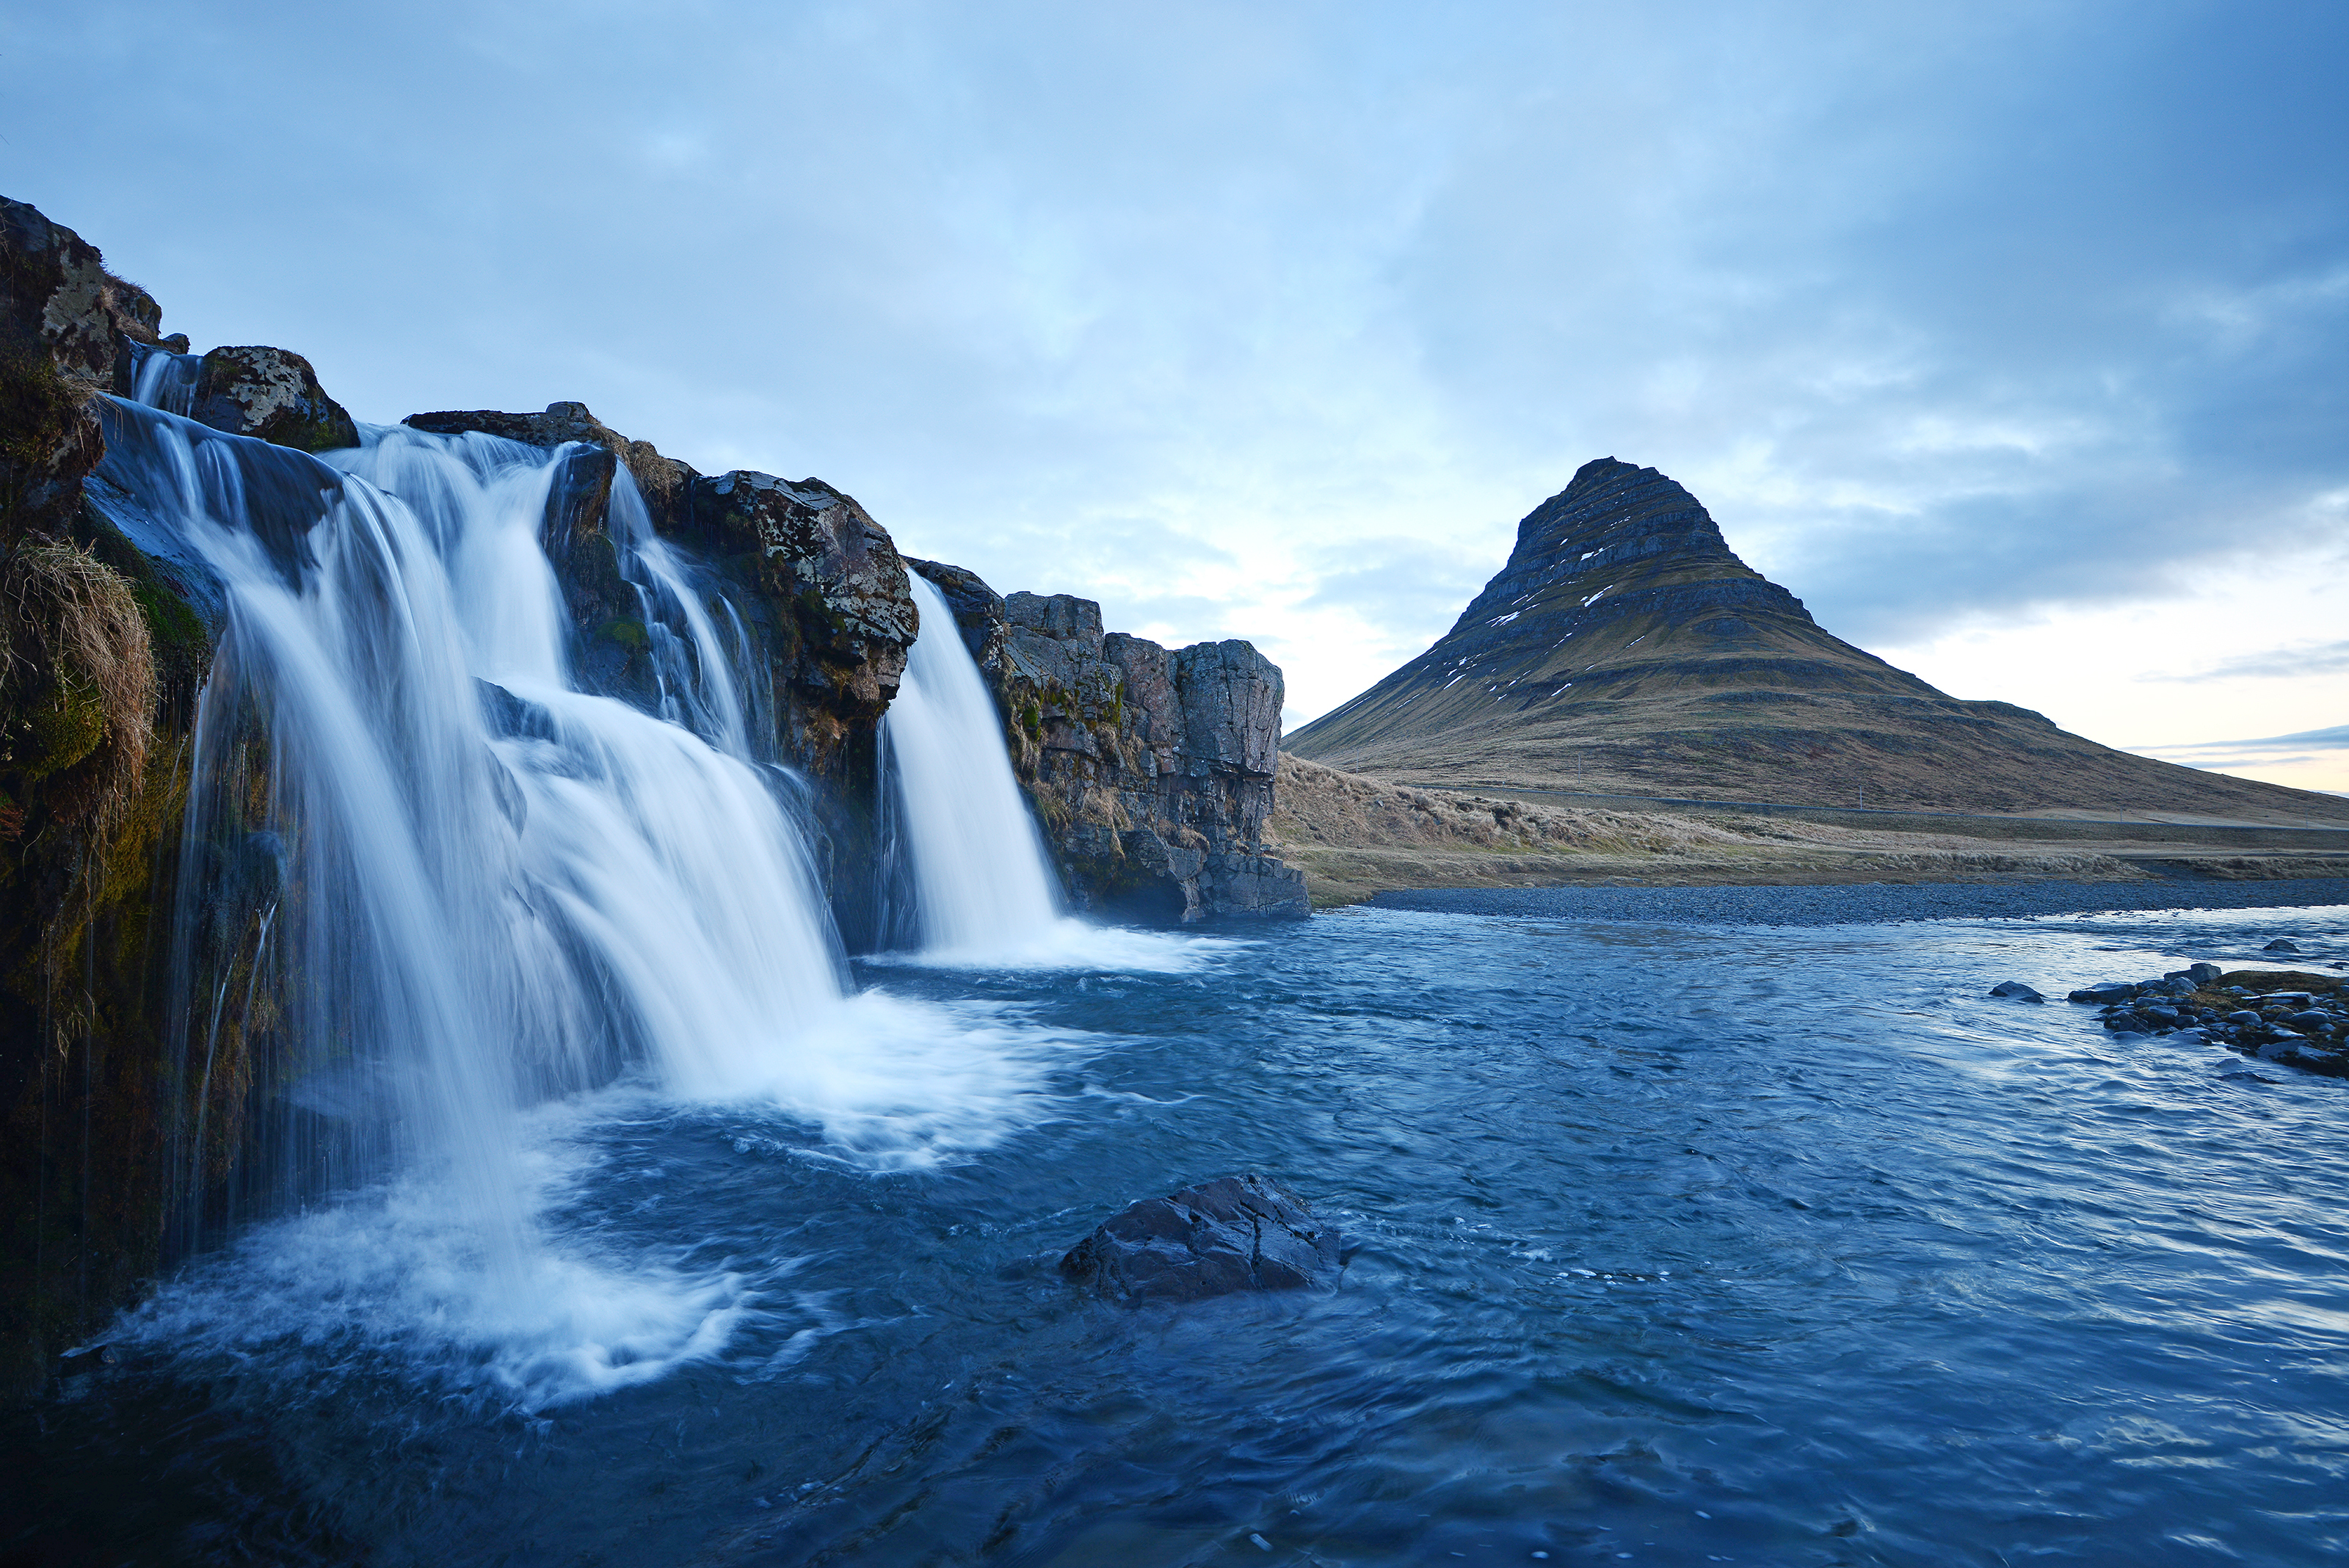 See the 7 Most Beautiful Waterfalls to Visit Around the World